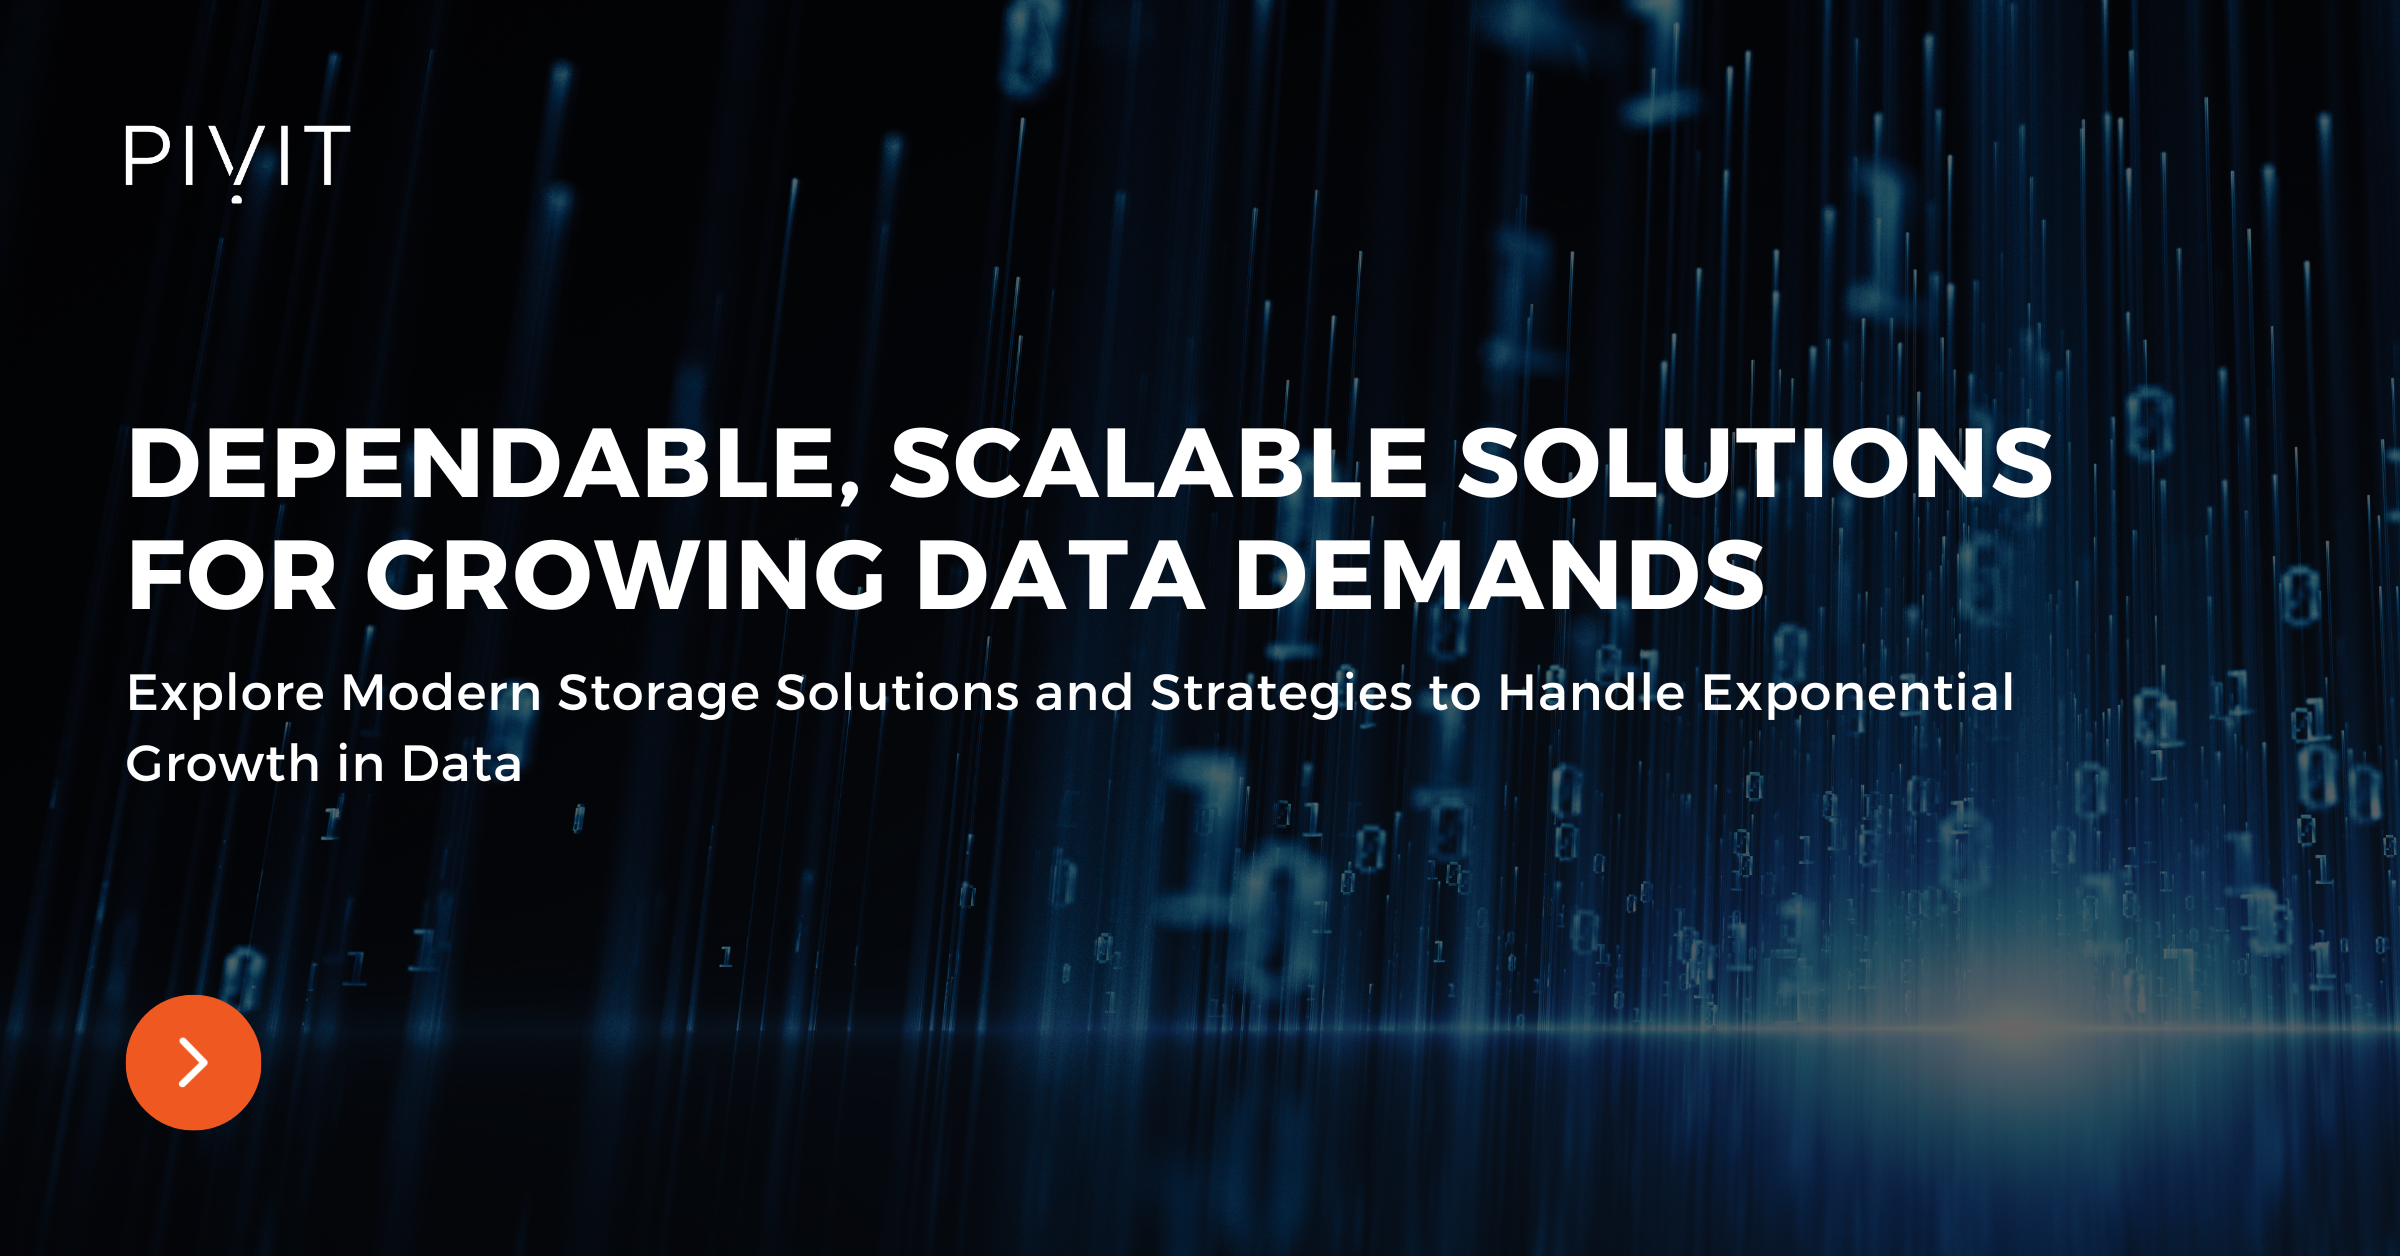 Dependable, Scalable Solutions for Growing Data Demands - Explore Modern Storage Solutions and Strategies to Handle Exponential Growth in Data